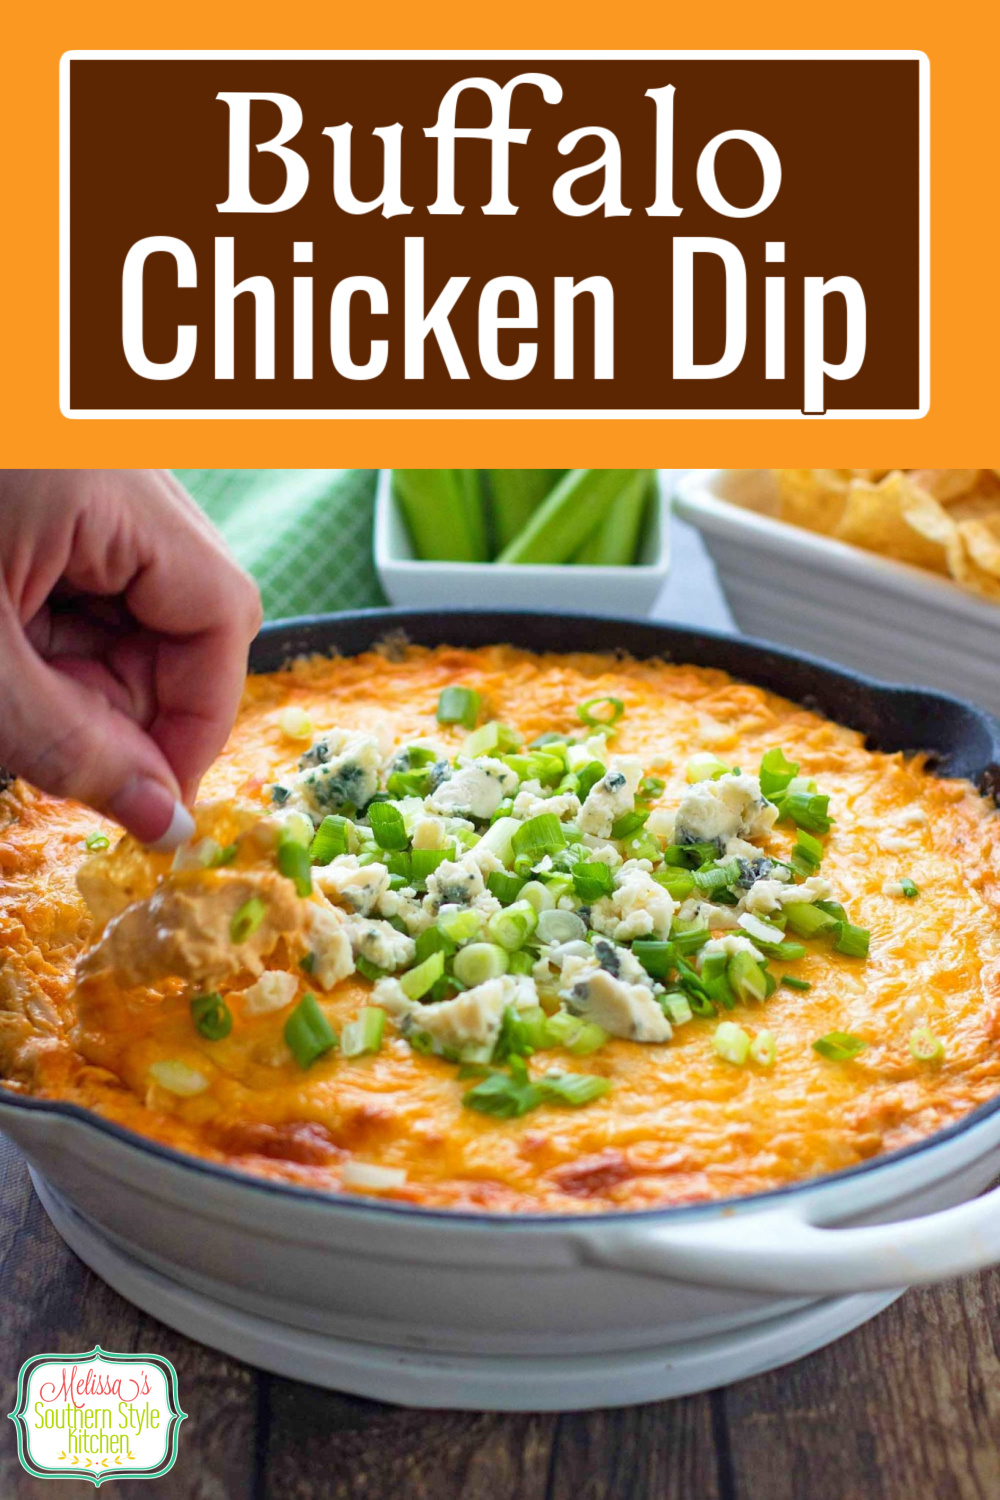 This Buffalo Chicken Dip is warm, gooey and ready for dipping with celery sticks, fritos, tortilla chips, crackers or garlic bread #buffalochickendip #buffalowingsrecipe #easydiprecipes #snacks #wings #easychickenrecipes #easychickenbreastrecipes #southern recipes via @melissasssk